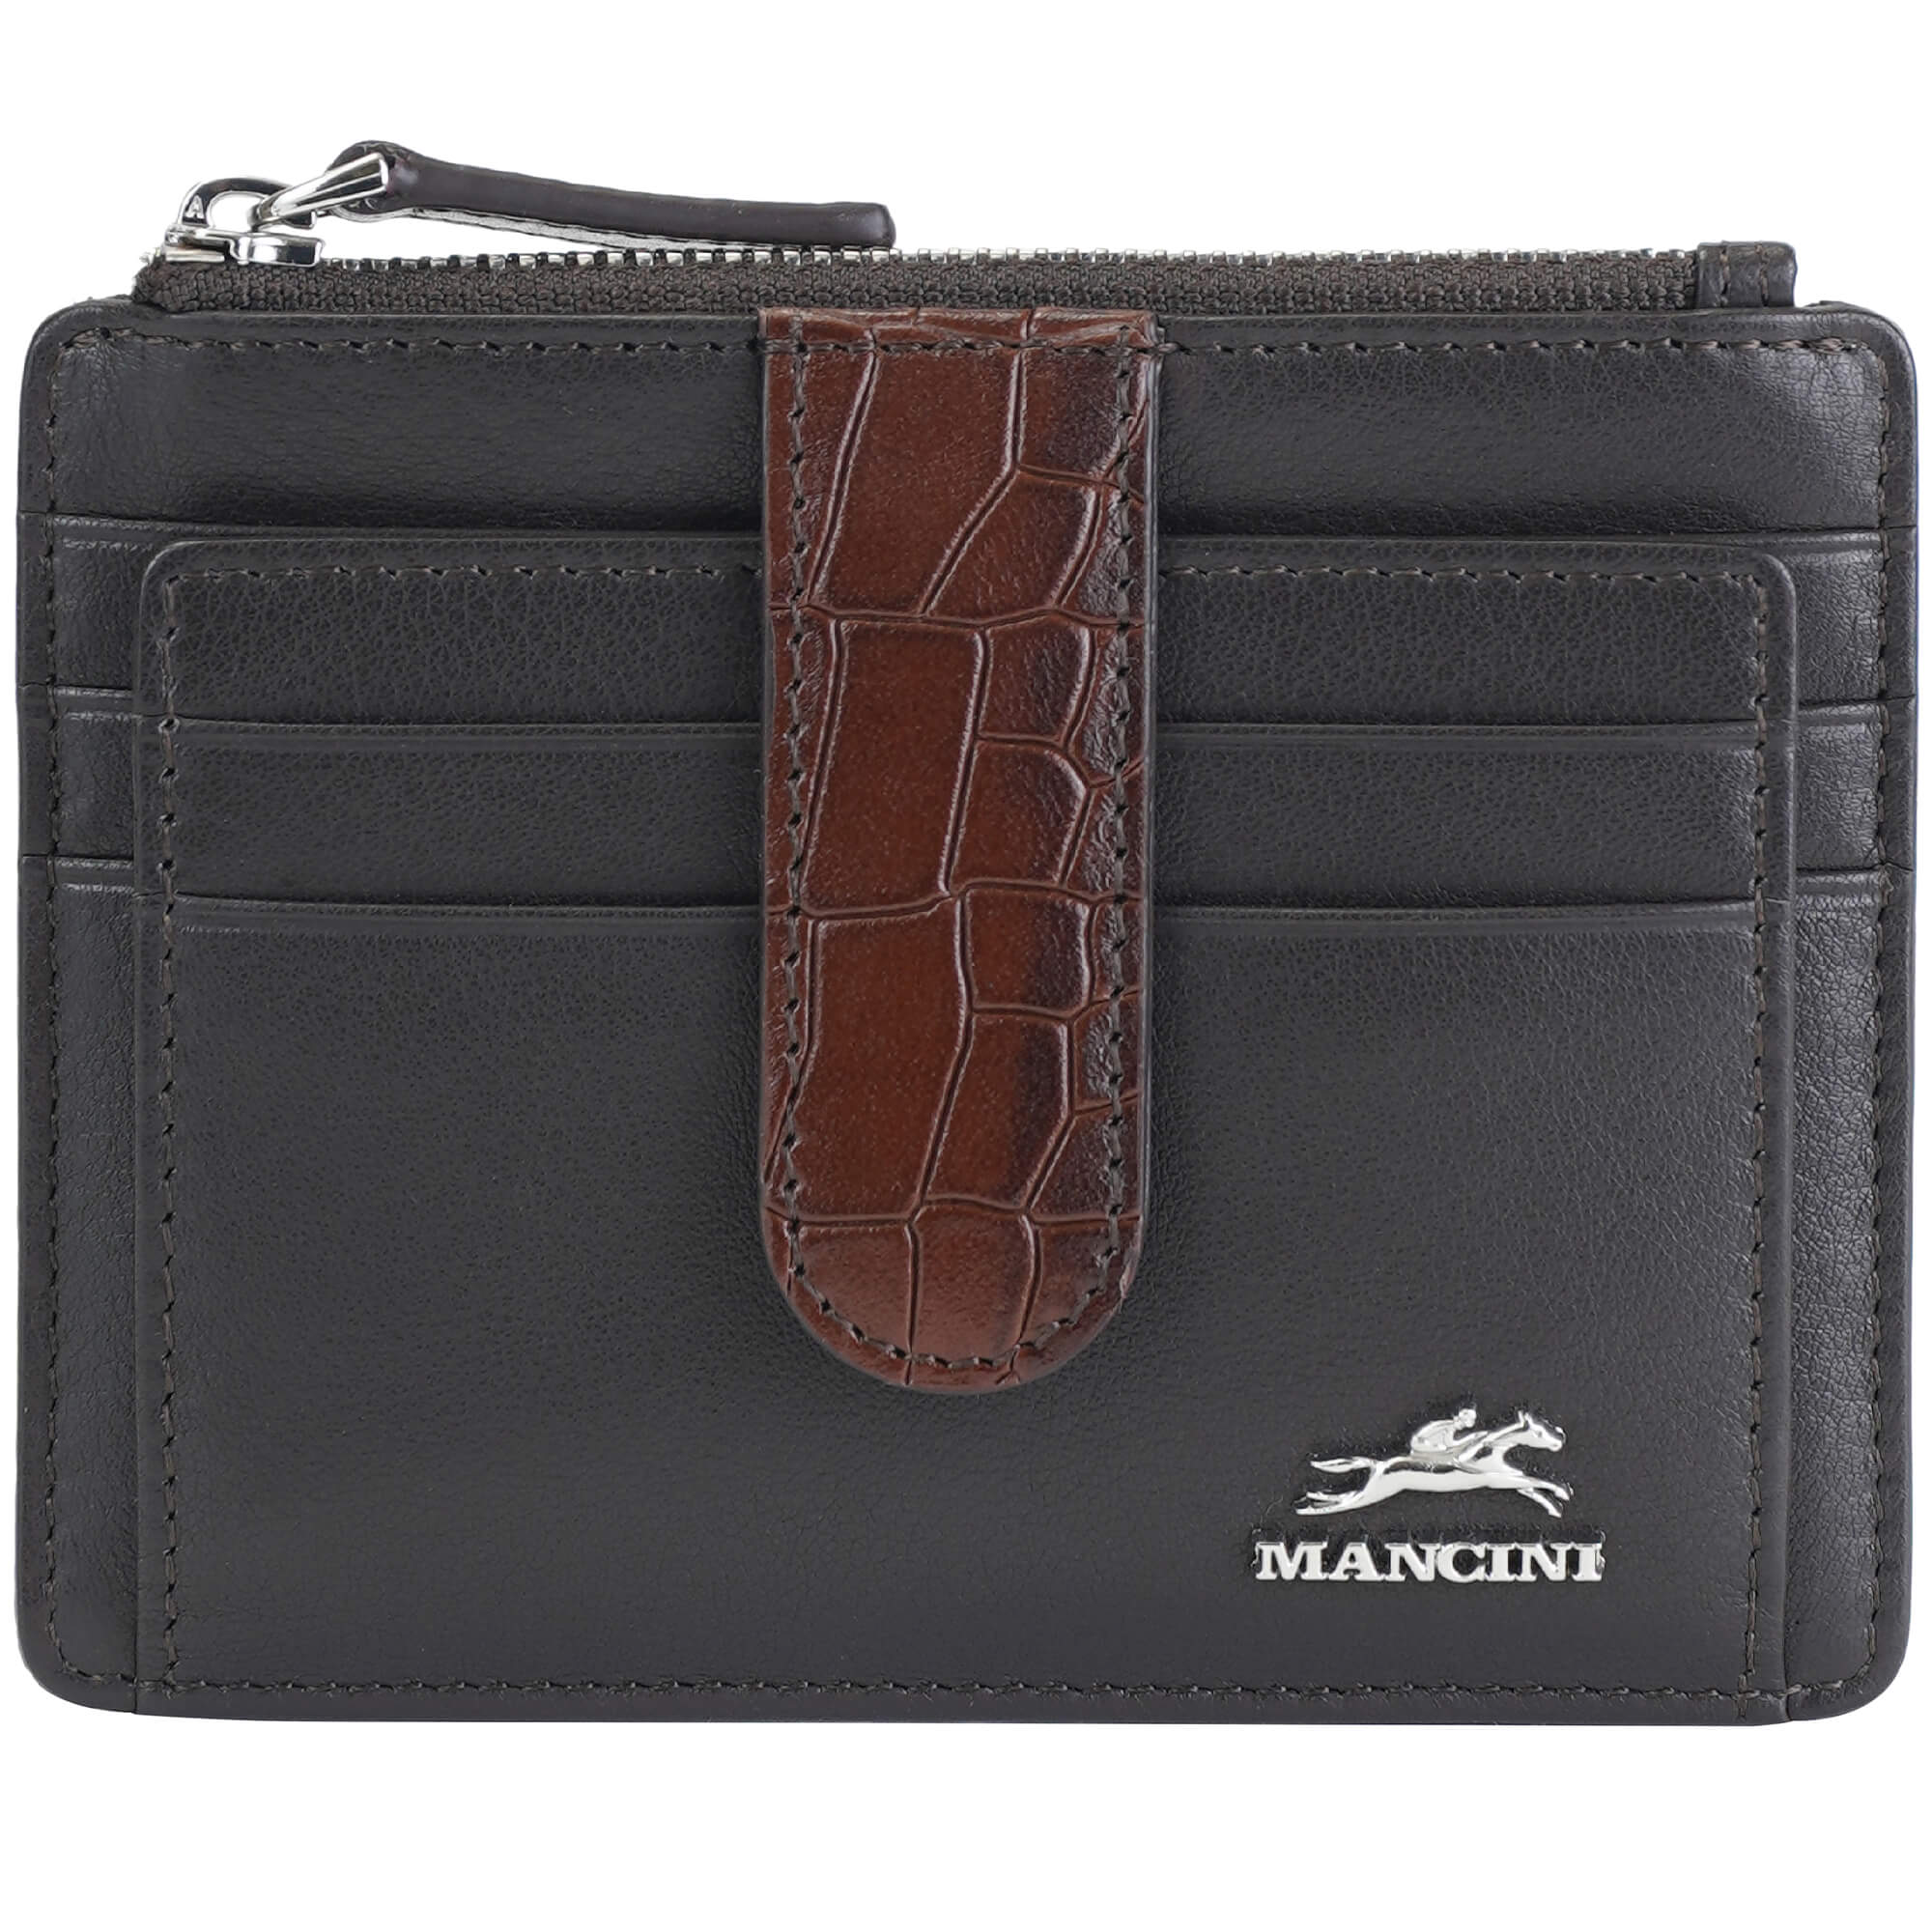 Croco2 Women’s Card Case with Enhanced RFID Protection